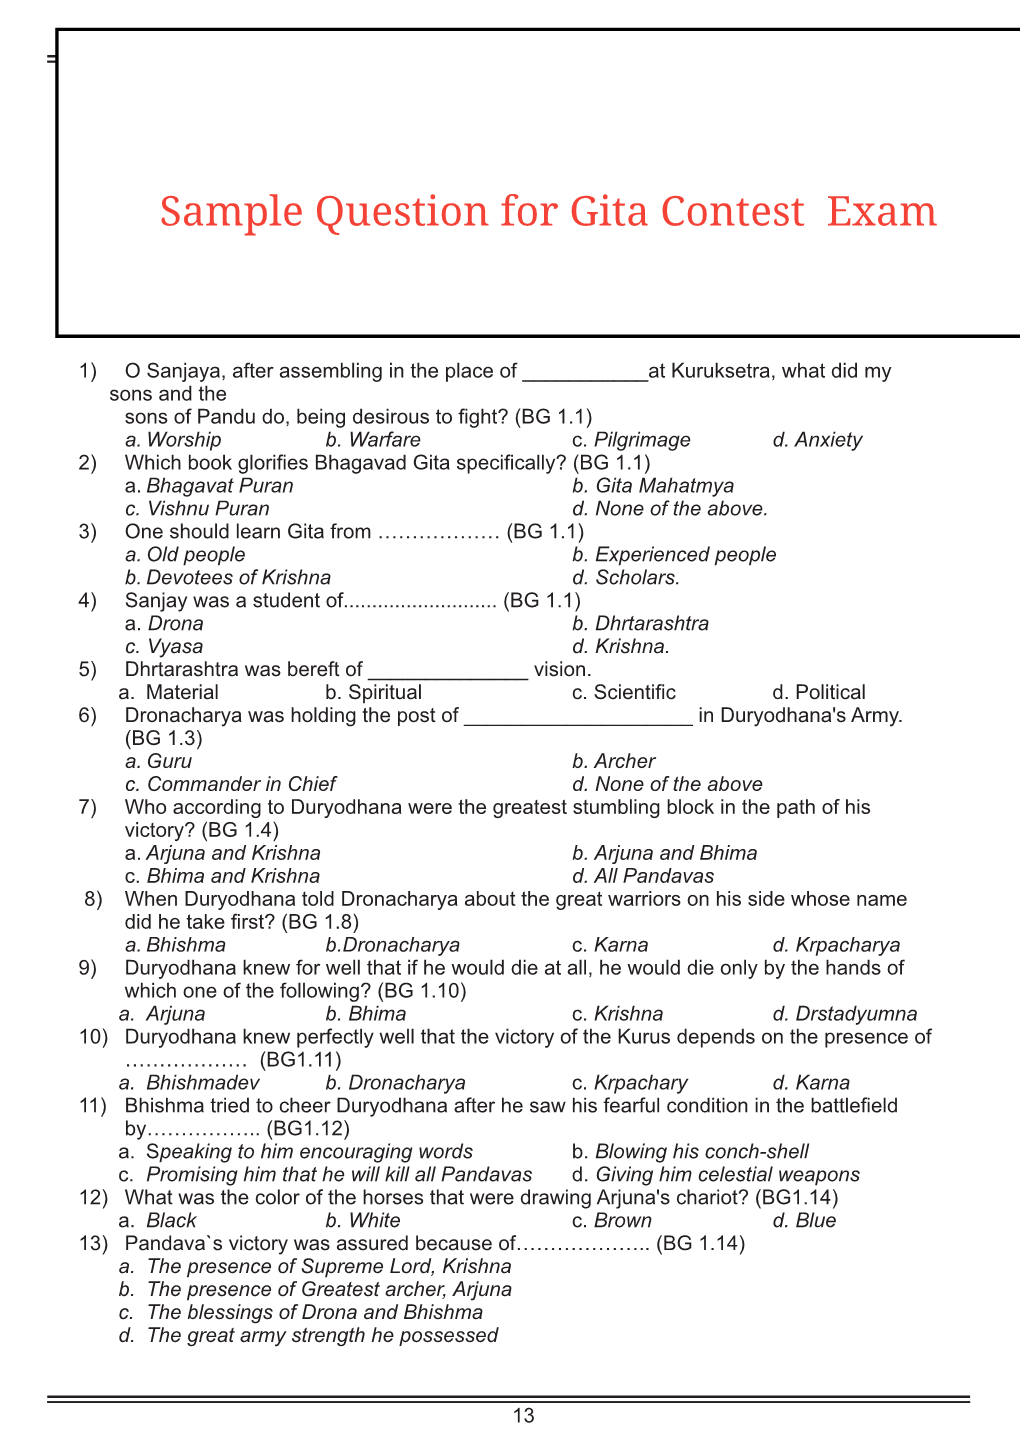 Sample Question for Gita Contest Exam PART B SAMPLE QUESTIONNAIRE Chapter 1